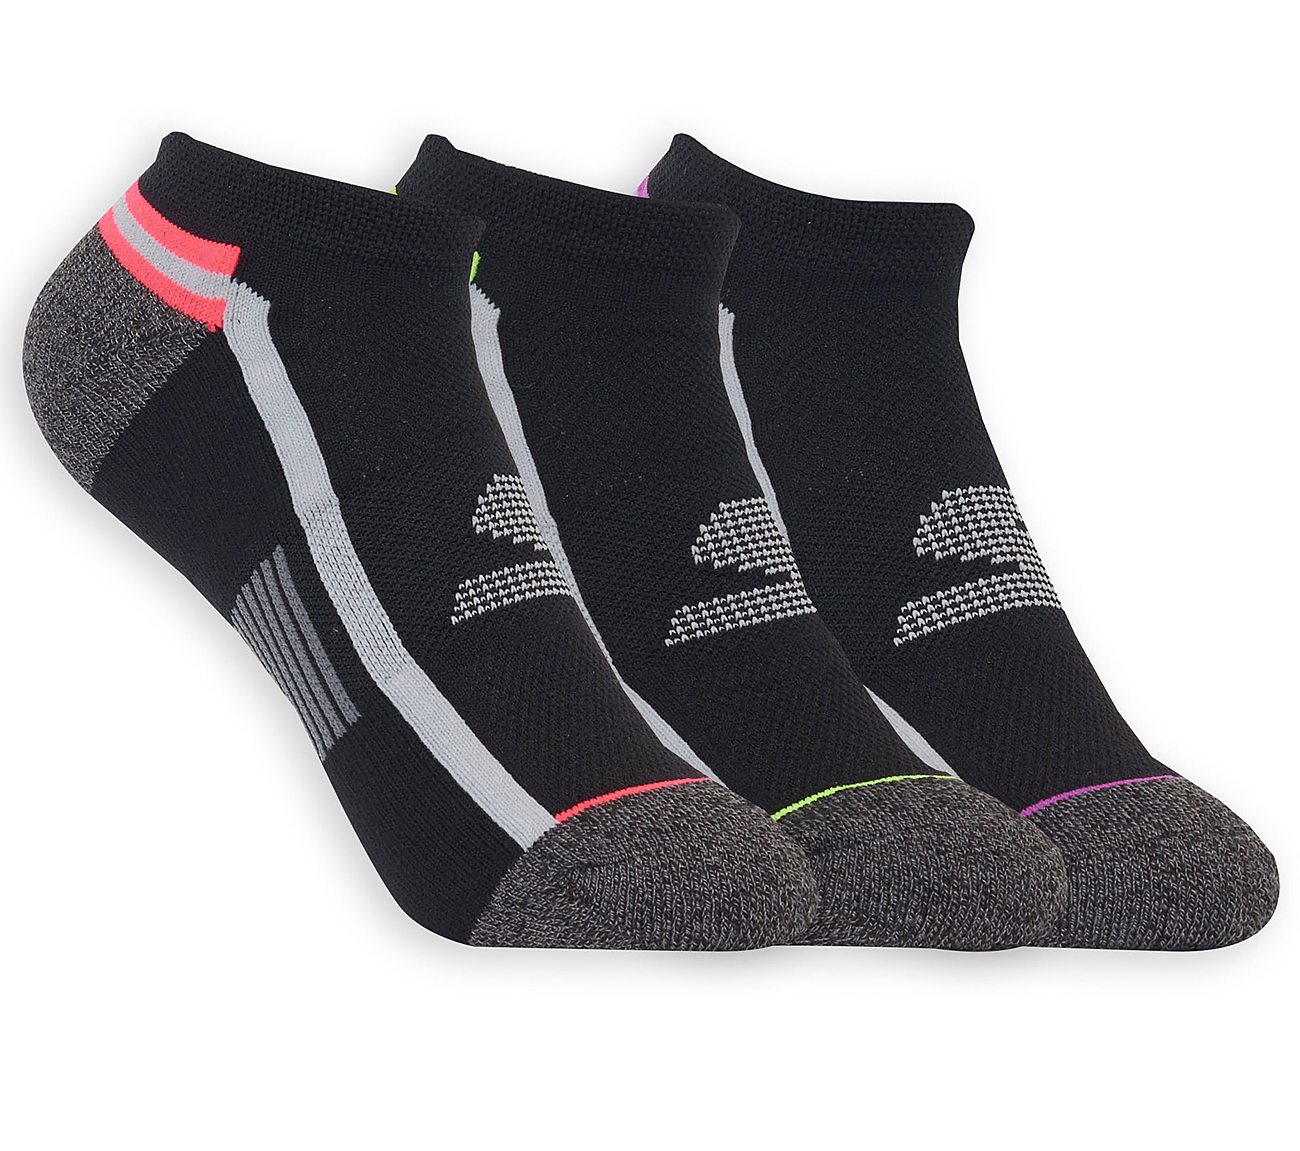 Buy SKECHERS 3 Pack Extended Terry Ankle Sport Socks Accessories Shoes